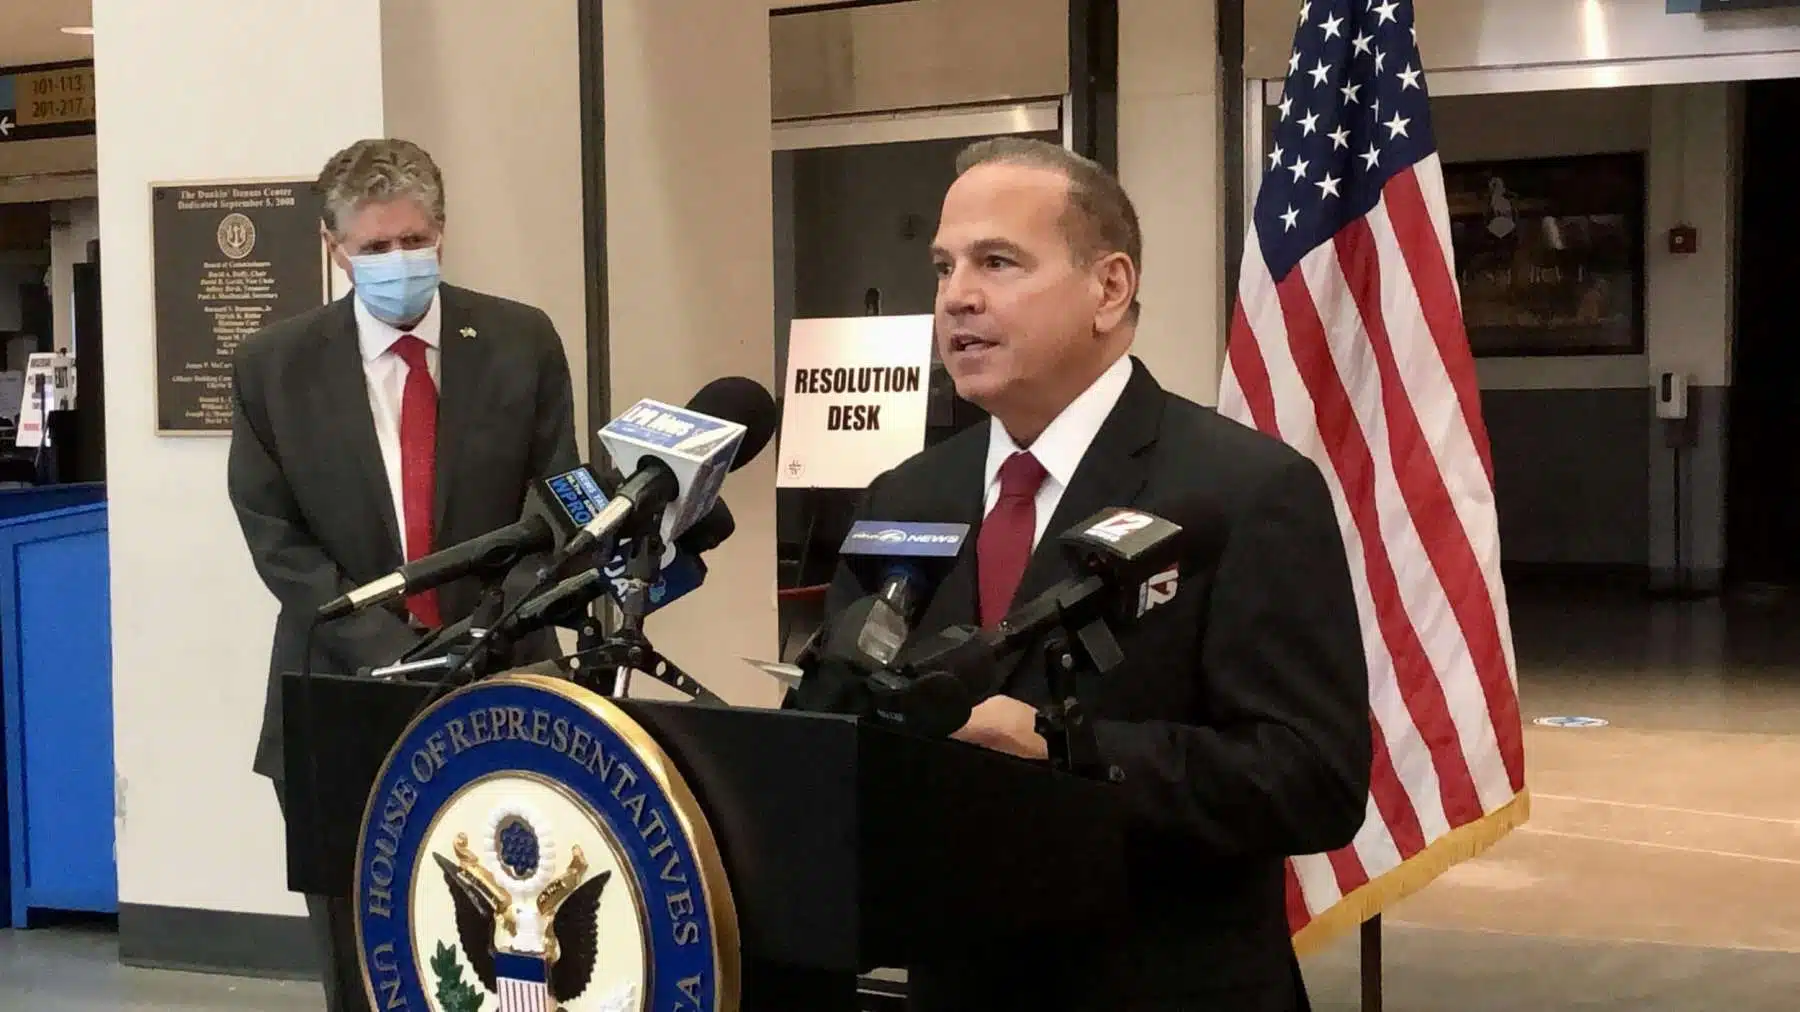 Rhode Island News: US House-passed Covid Relief Package will benefit Rhode Island, says Cicilline